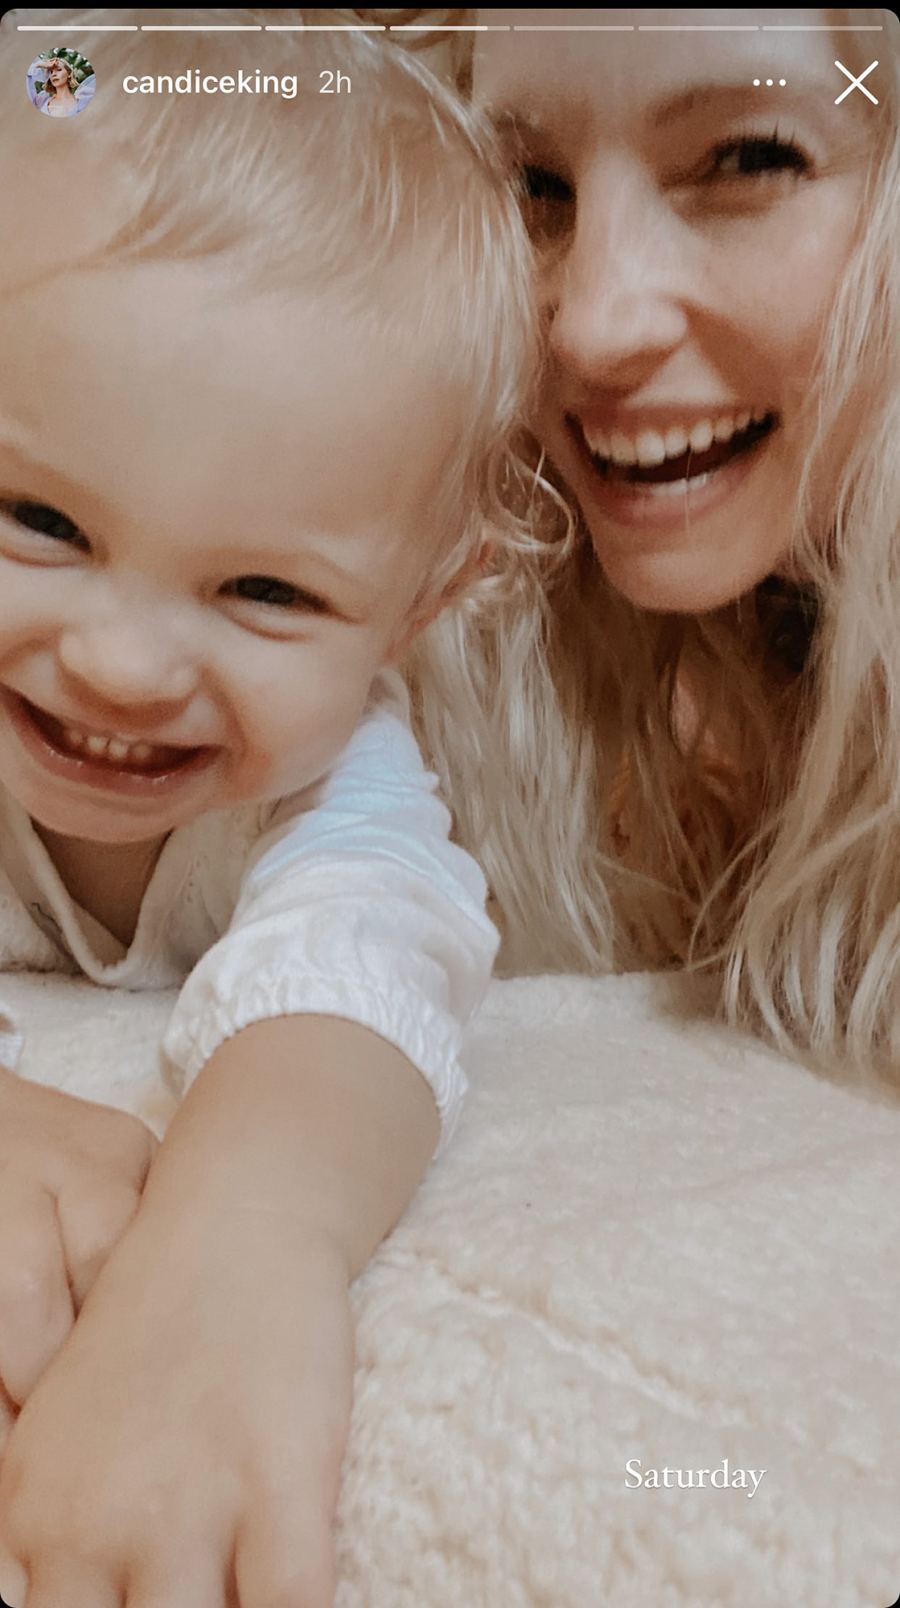 Candice Accola and Joseph King's Family Album With Daughters Florence and Josephine Post-Split